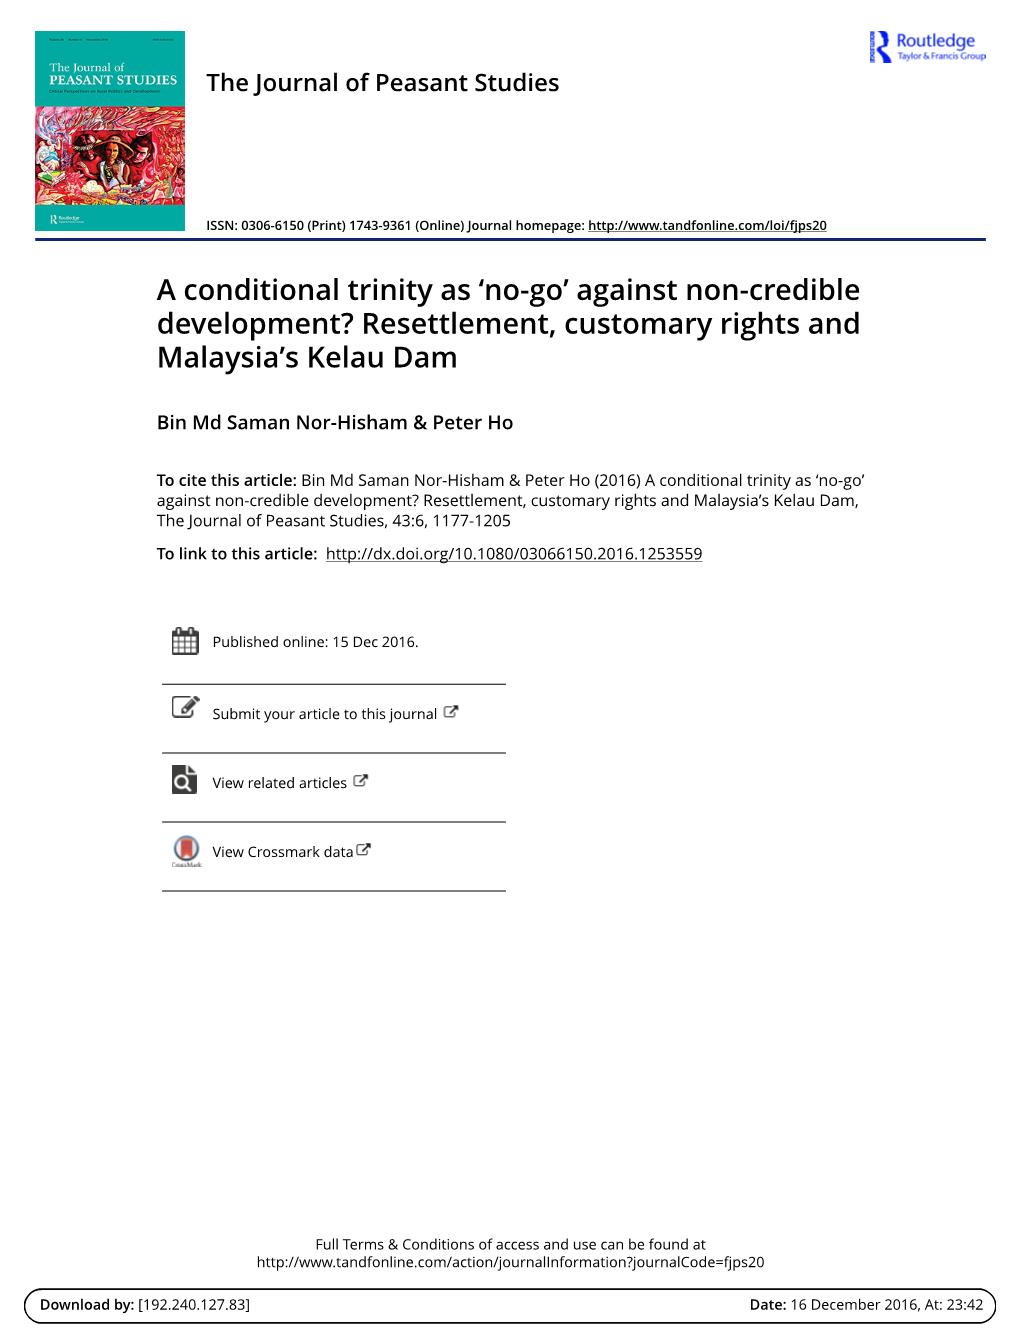 Resettlement, Customary Rights and Malaysia's Kelau